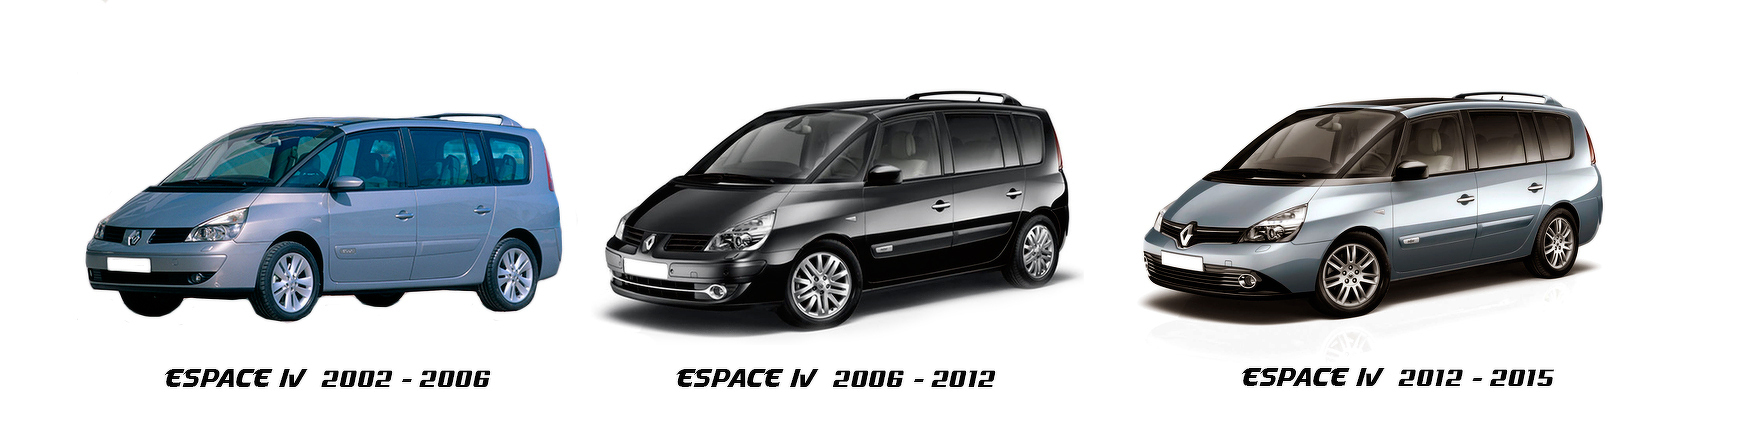 renault space 2003 2004 2005 2006 2007 2008 2009 2010  11 12 2013 2014